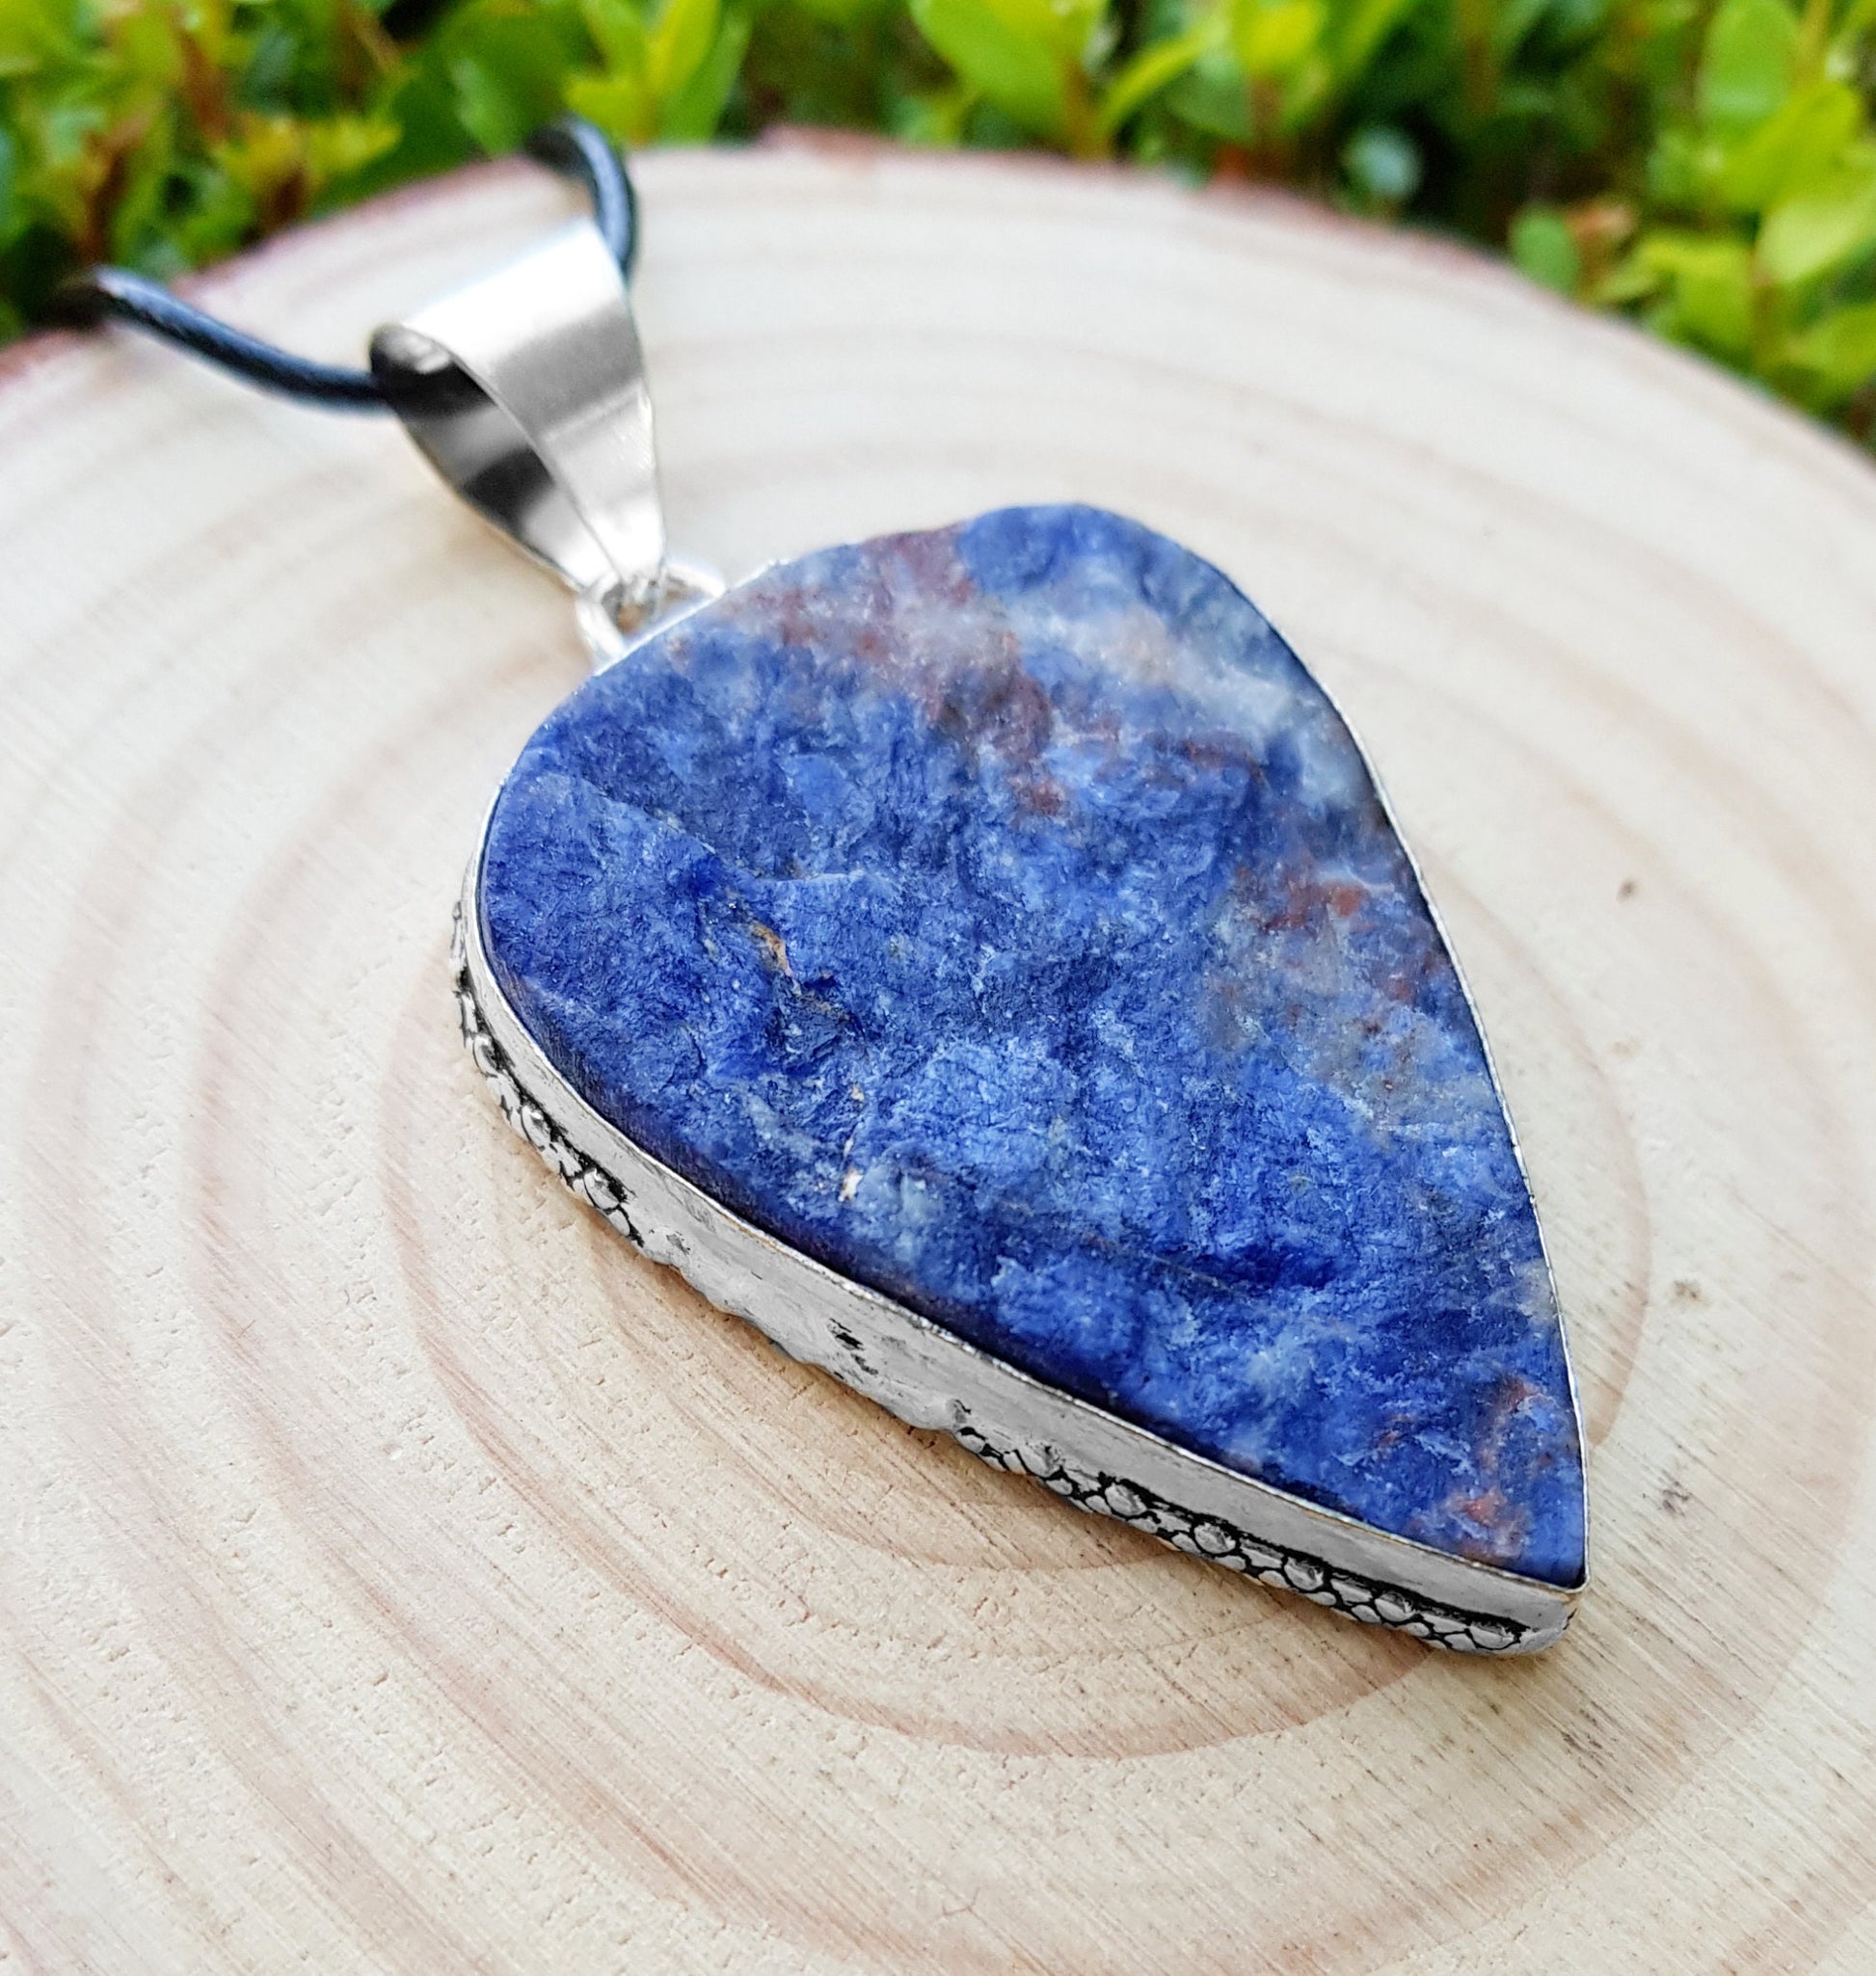 Sodalite Pendant In Sterling Silver Boho Crystal Necklace Unique Gift For Women GypsyJewelry